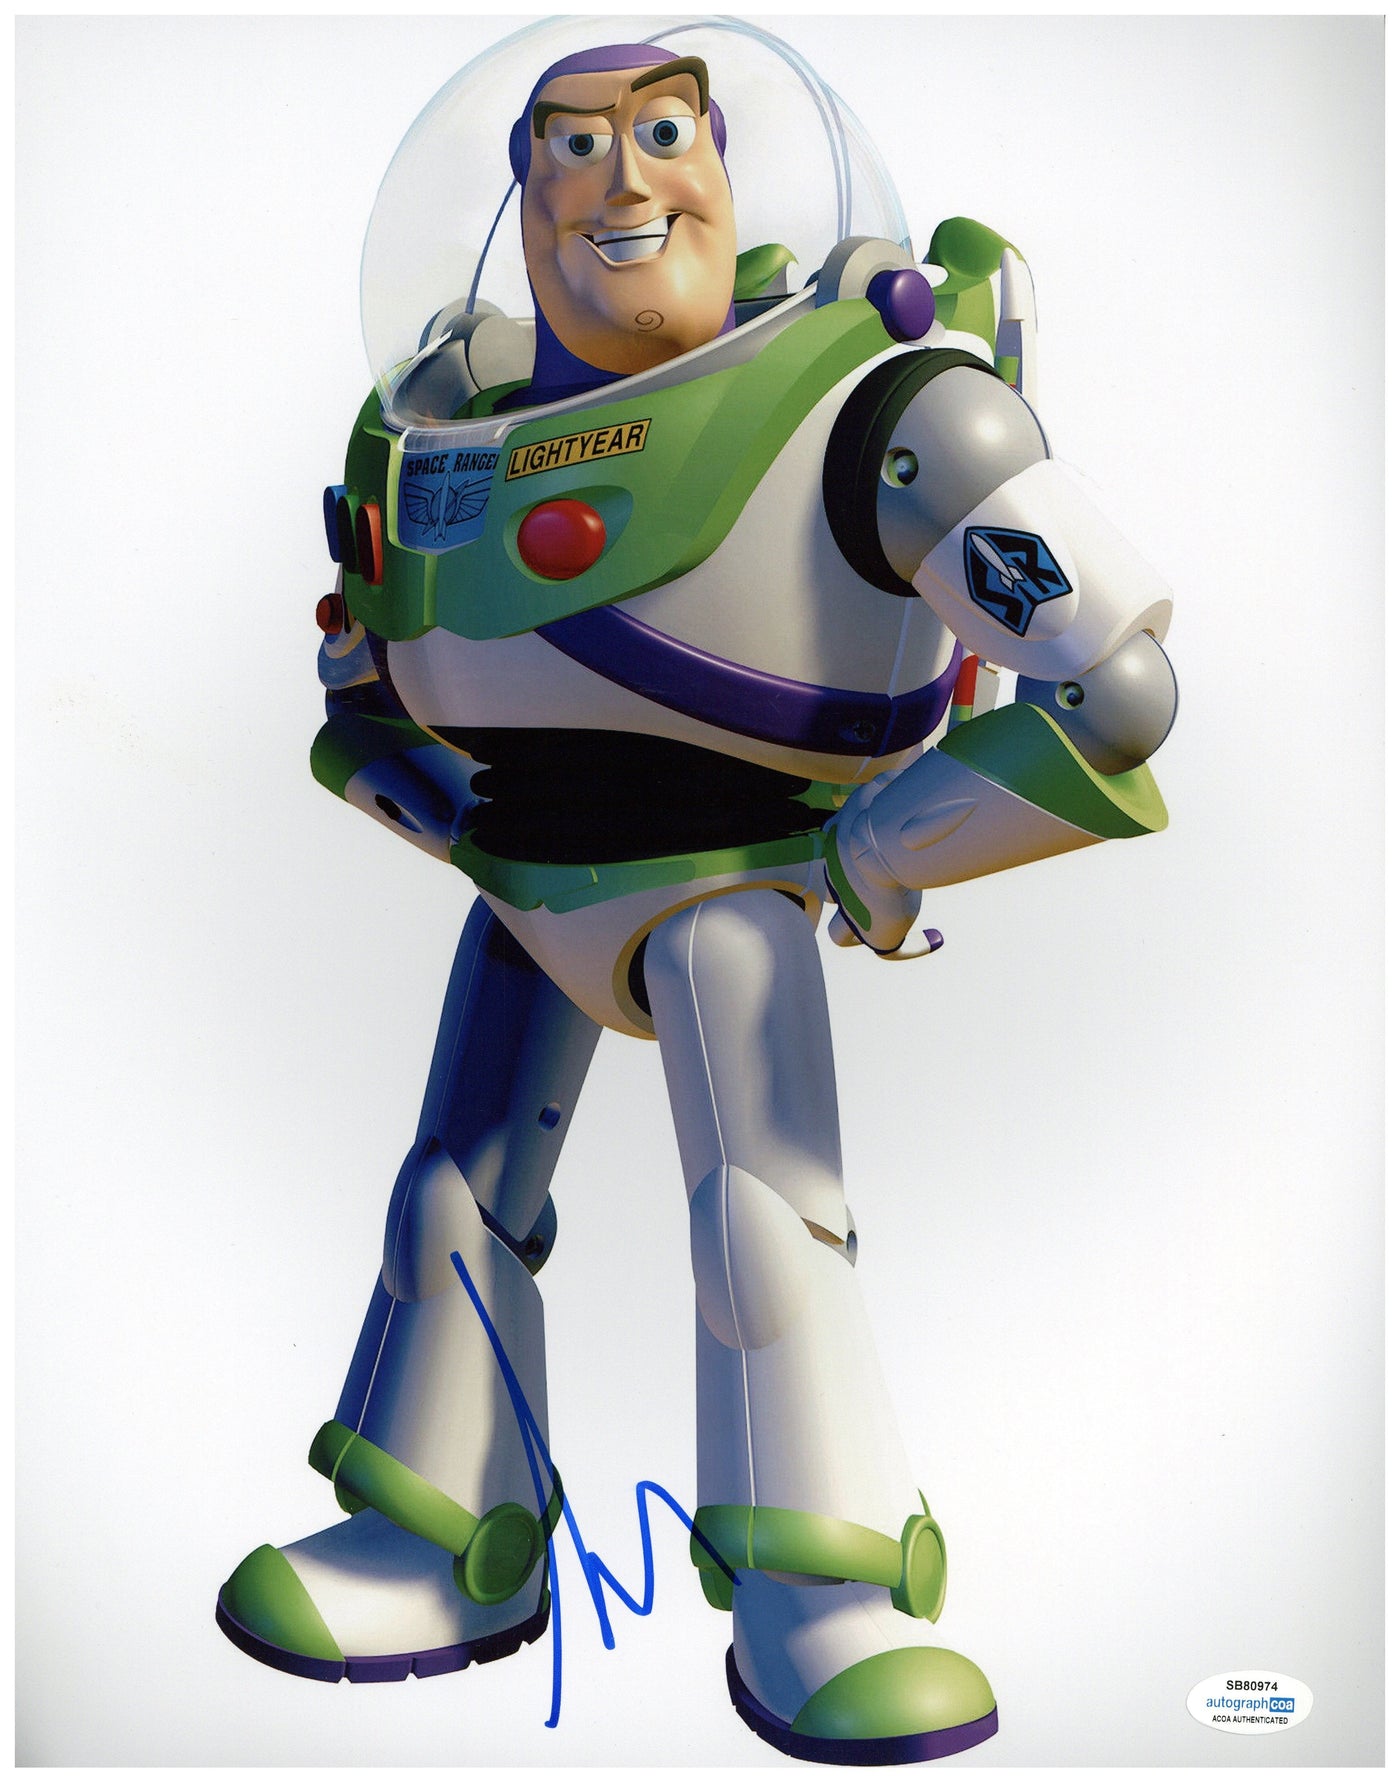 Tim Allen Signed 11x14 Photo Toy Story Buzz Lightyear Authentic Autographed ACOA